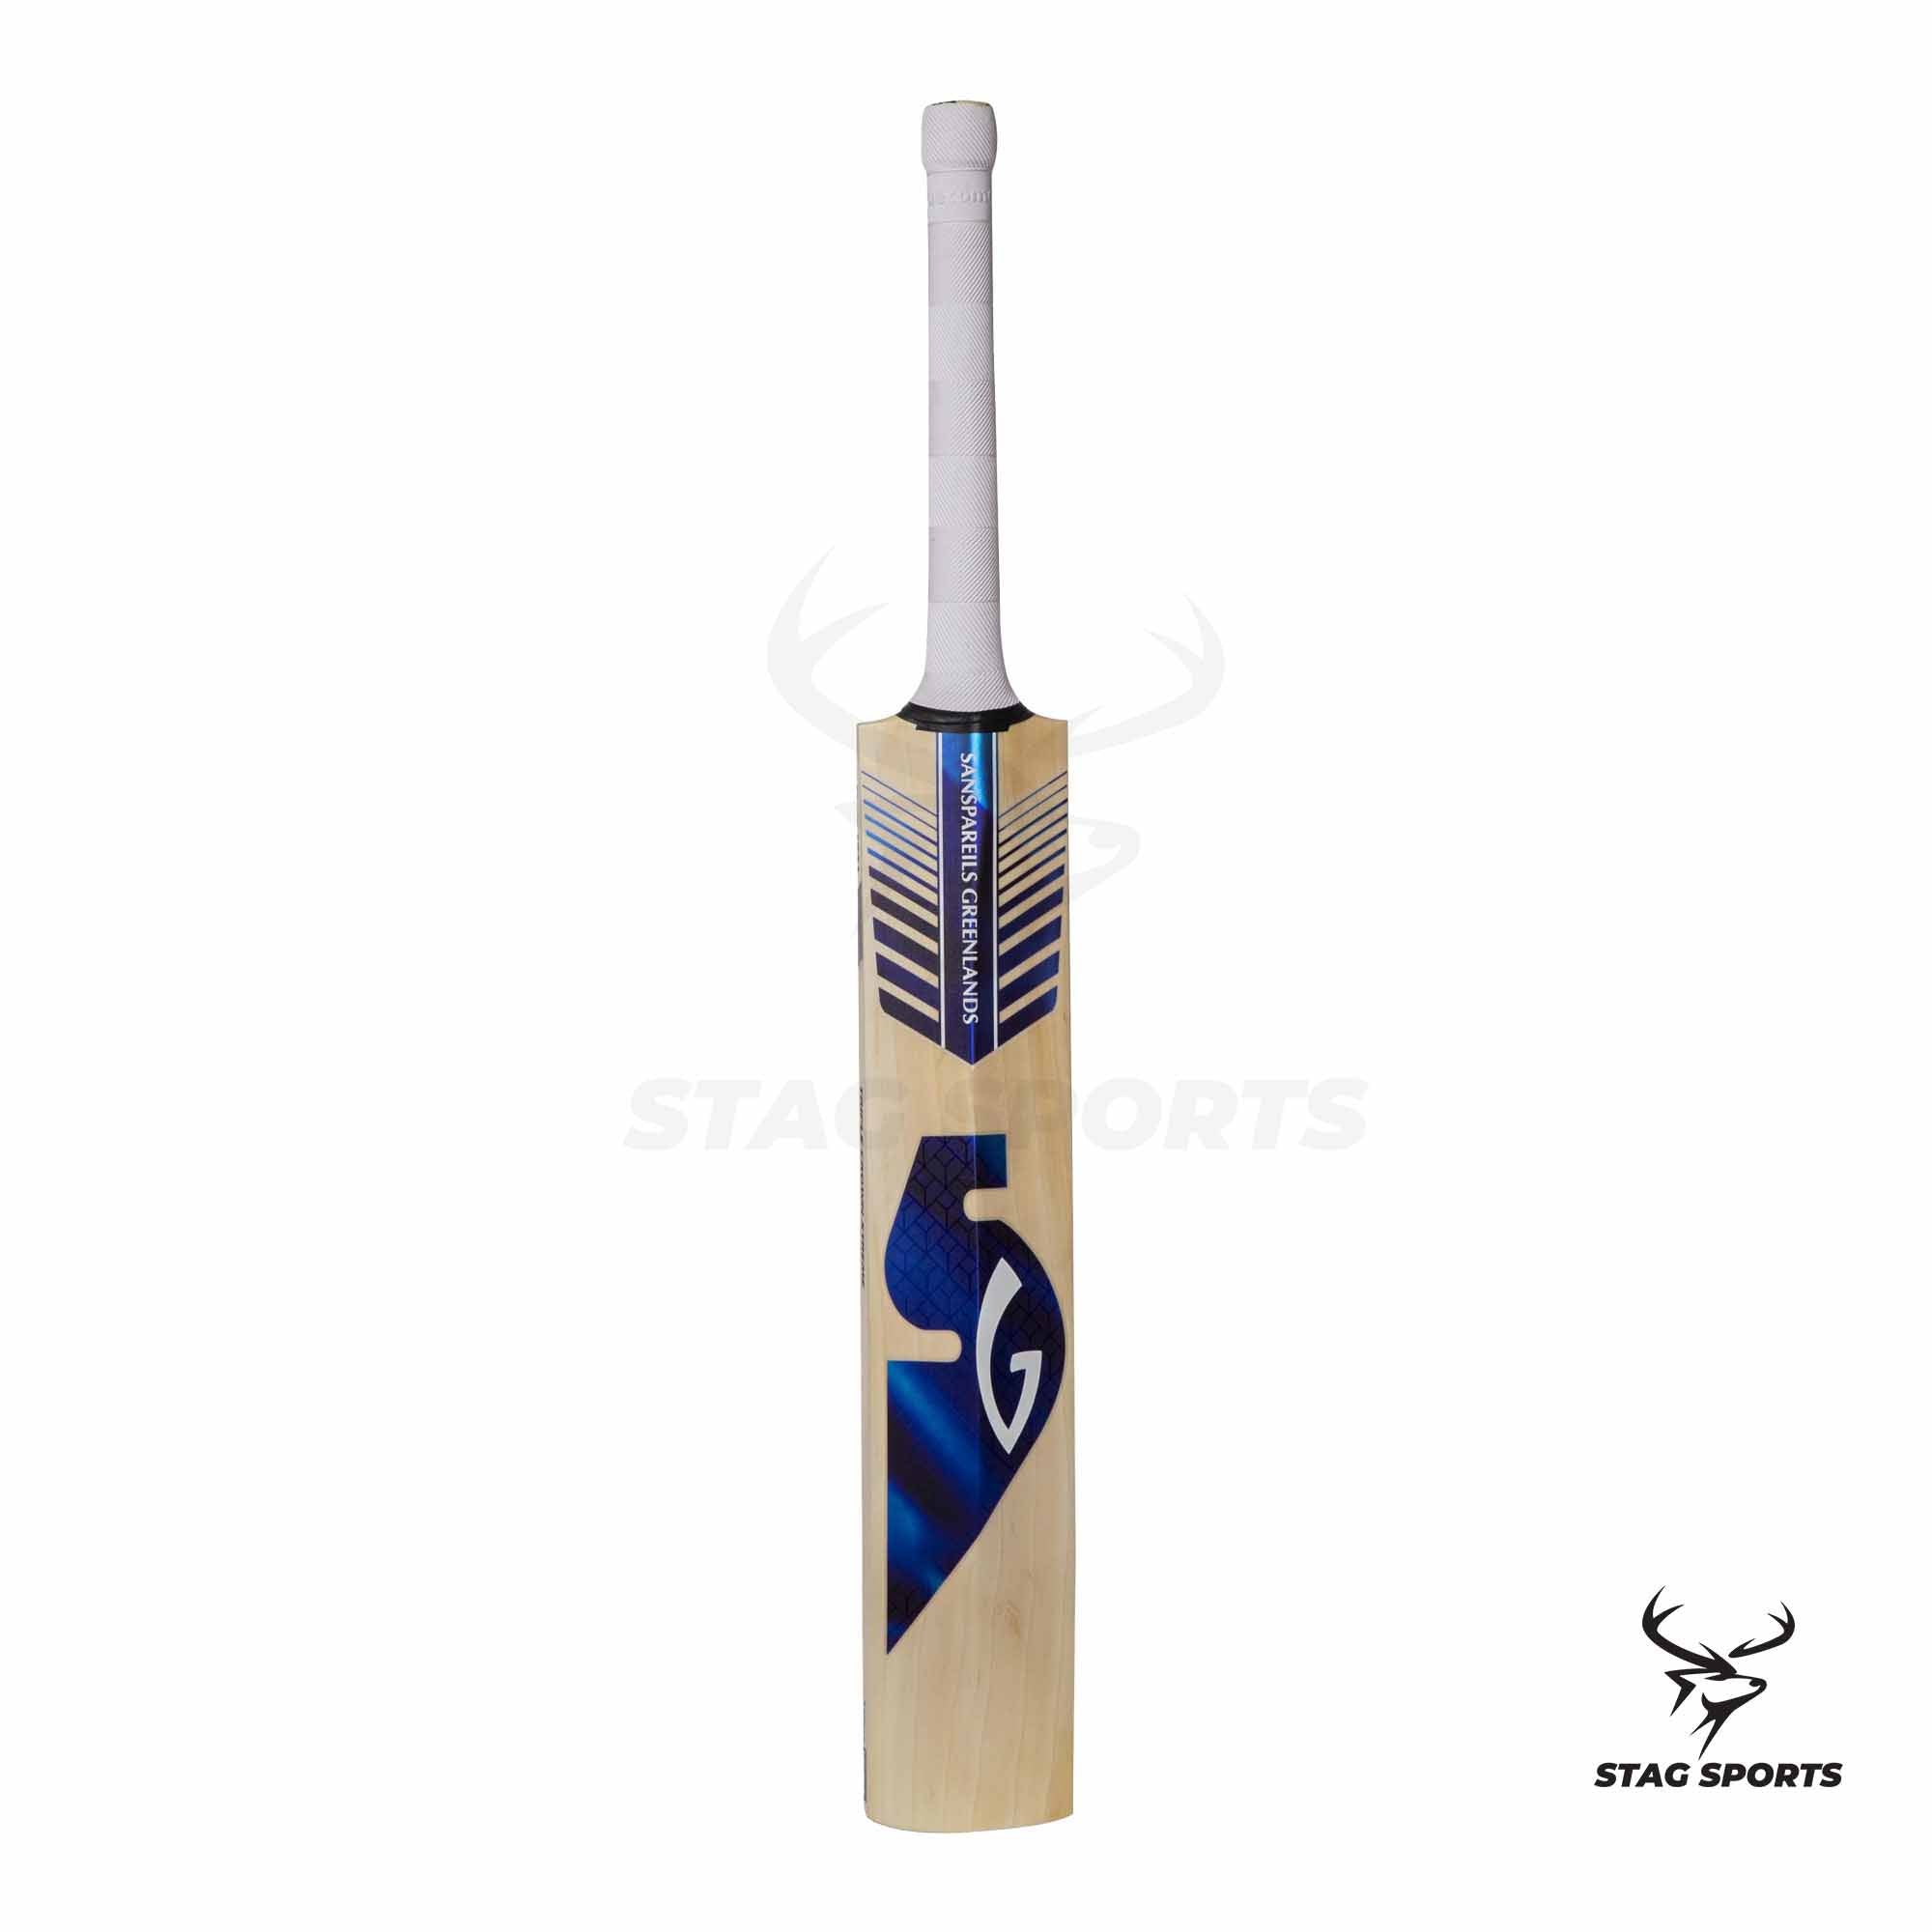 SG Triple Crown Xtreme English Willow Cricket Bat buy from stagsports